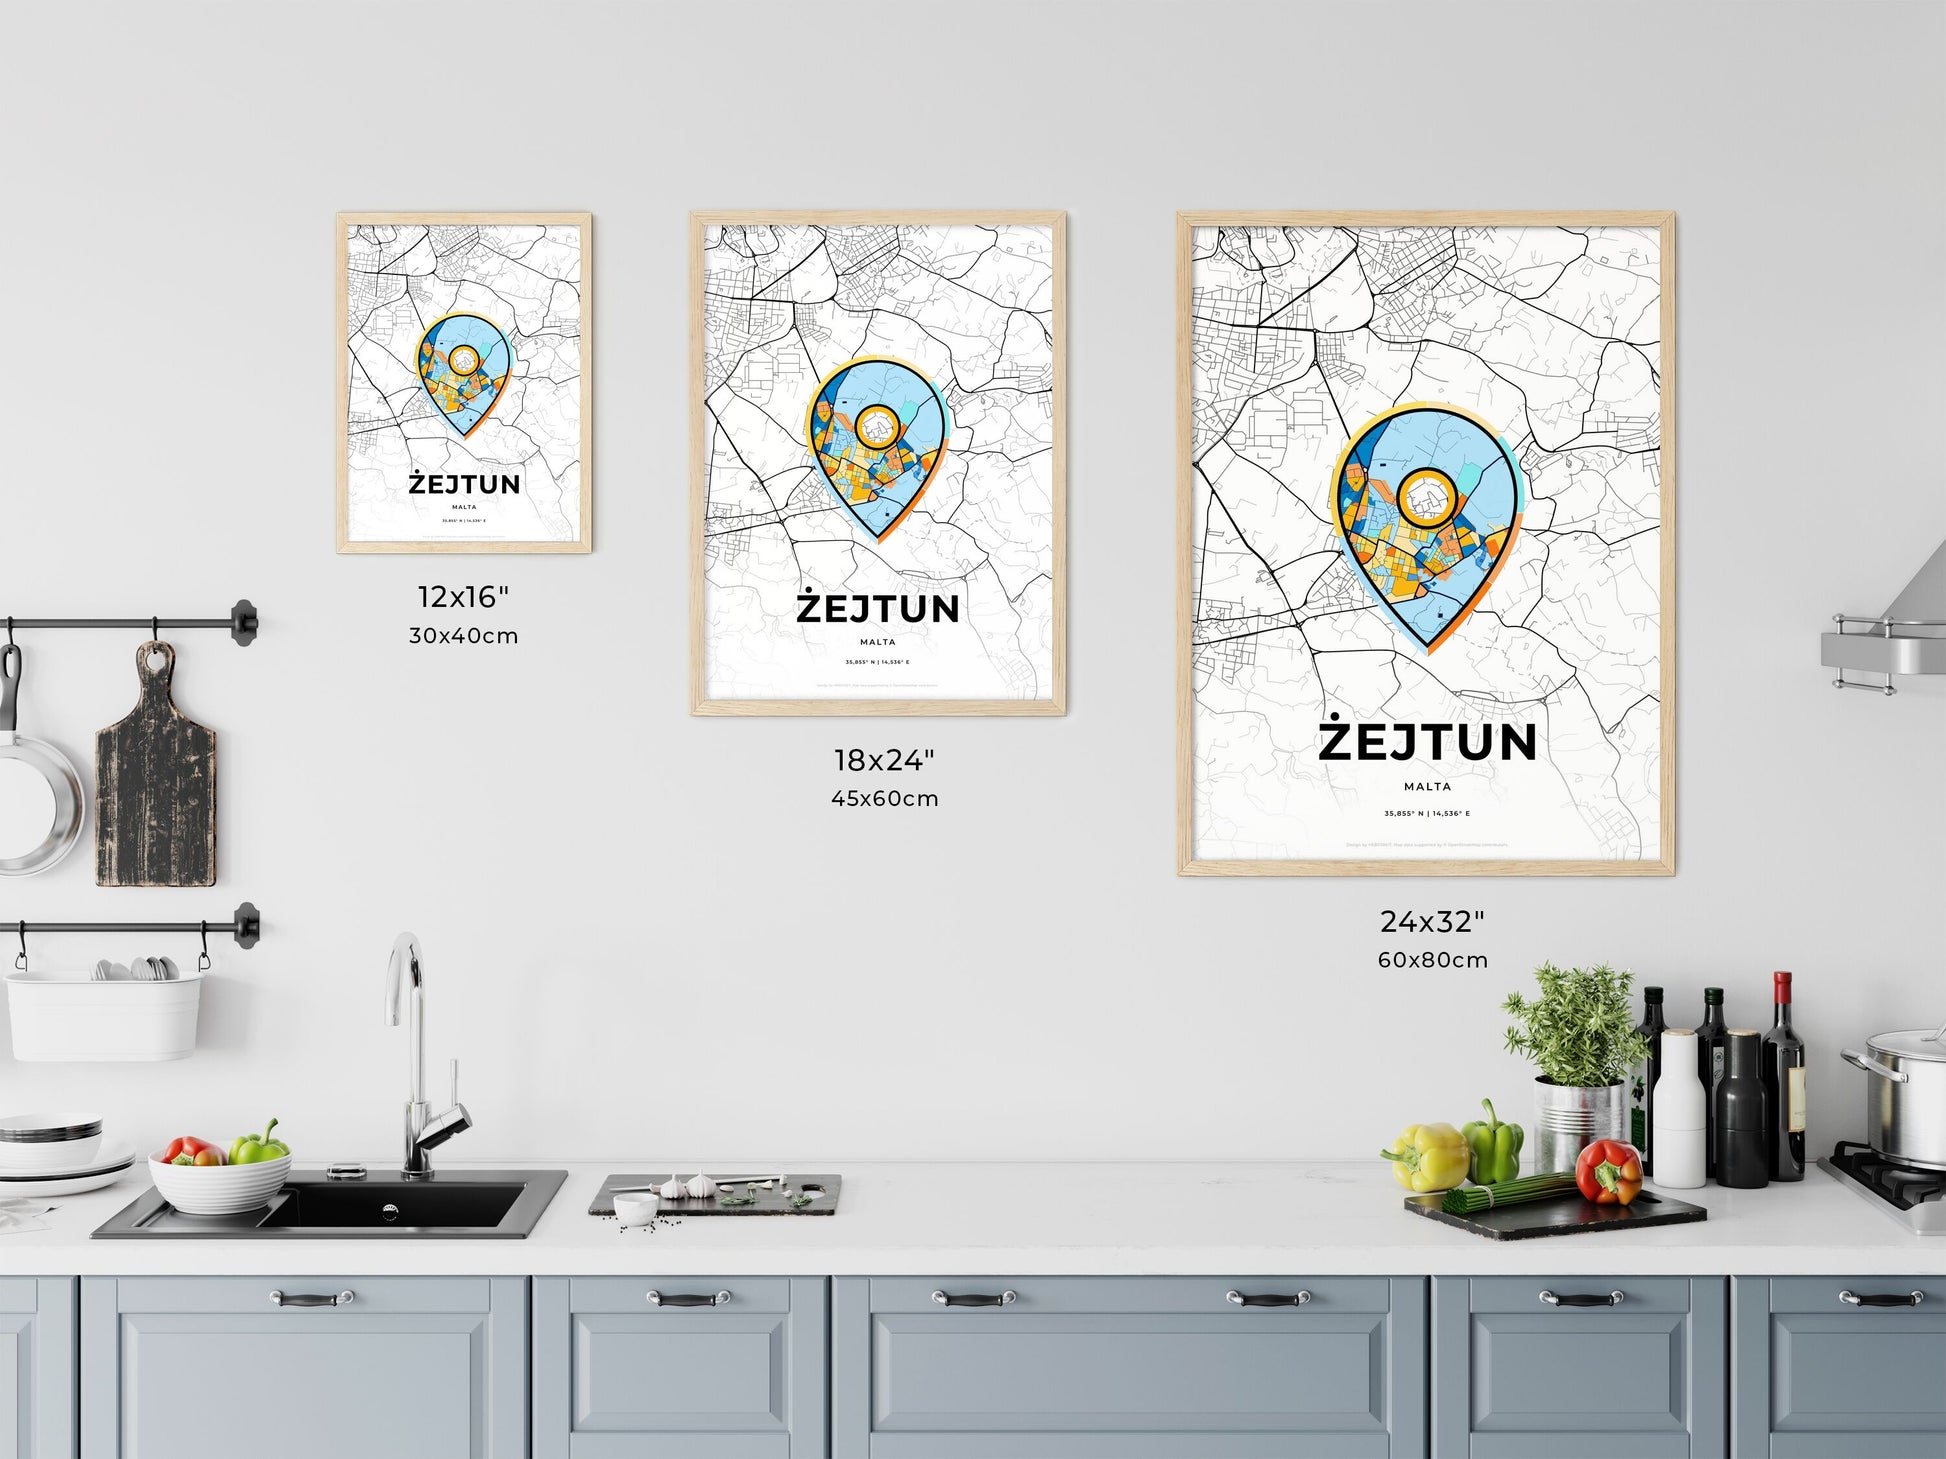 ŻEJTUN MALTA minimal art map with a colorful icon. Where it all began, Couple map gift.